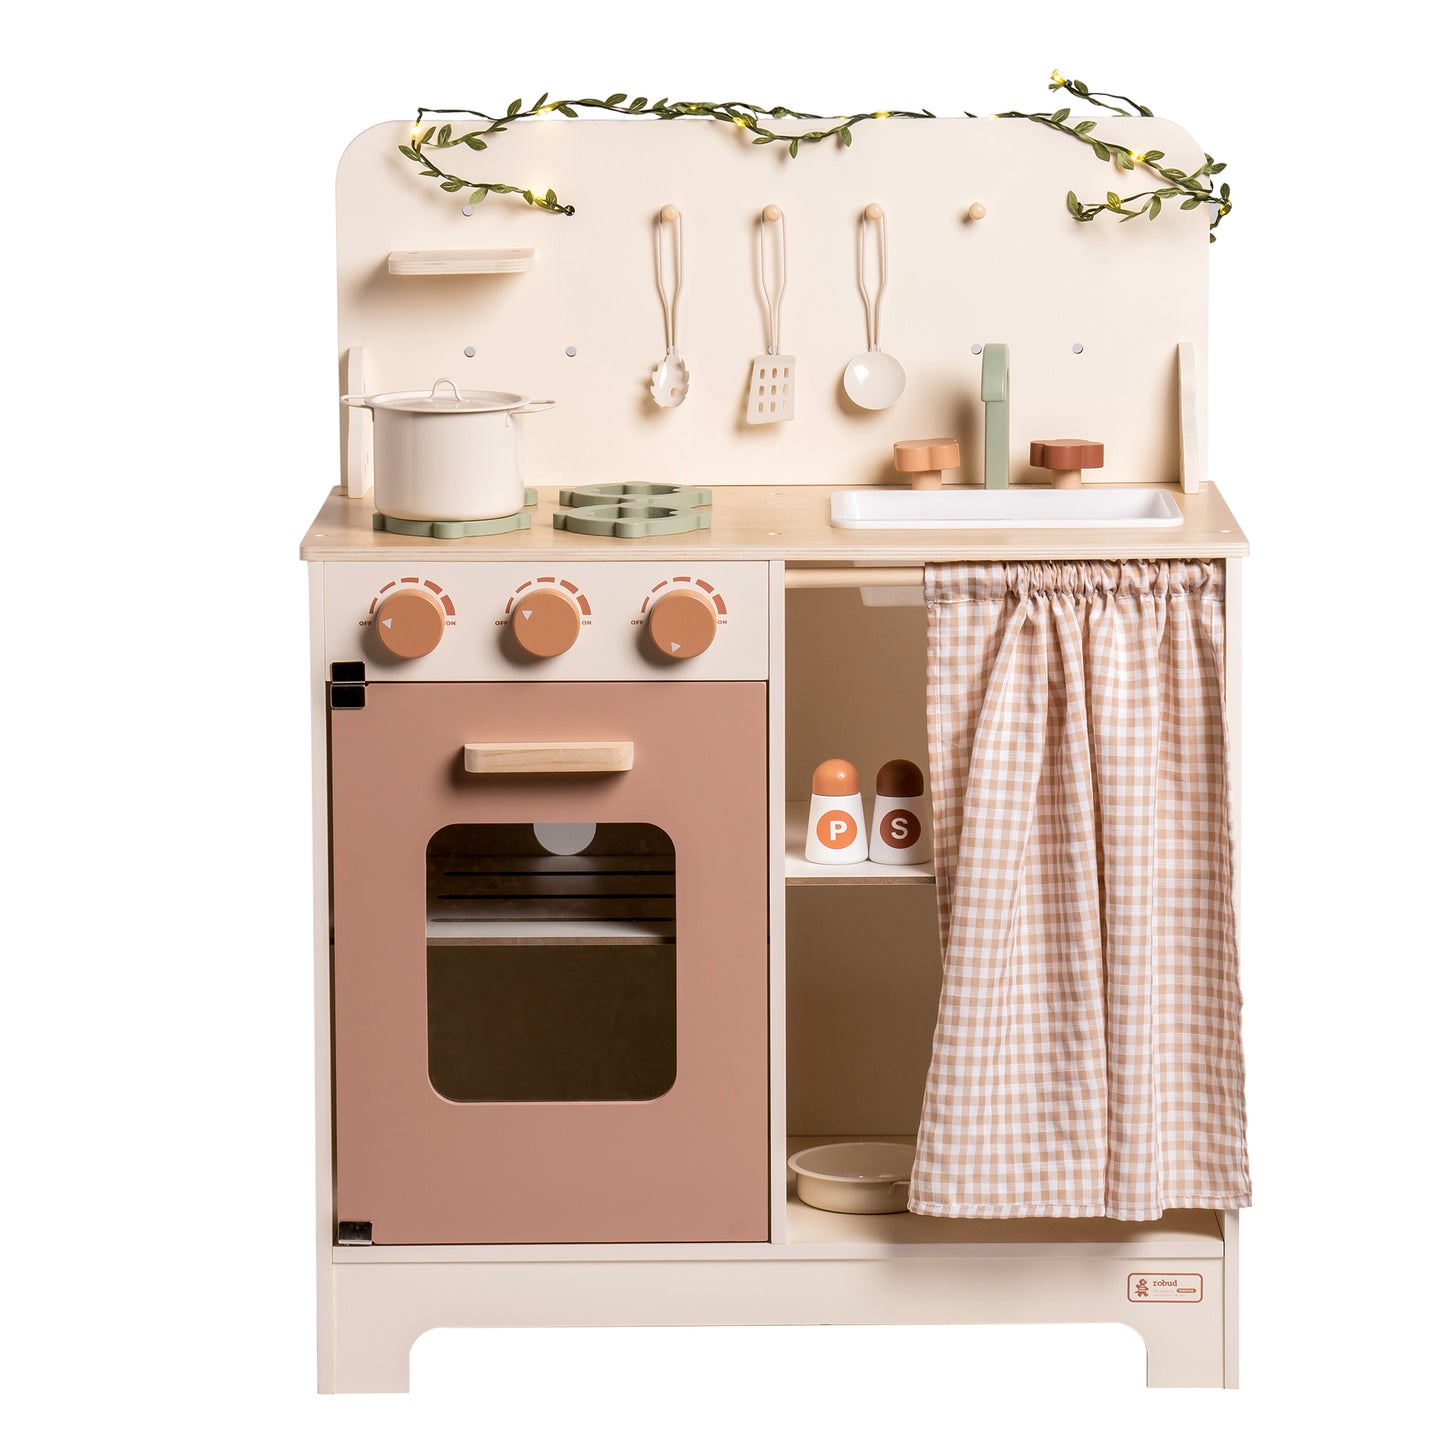 11 in 1 Wooden Play Kitchen Set Cream Color Kitchen with Curtain